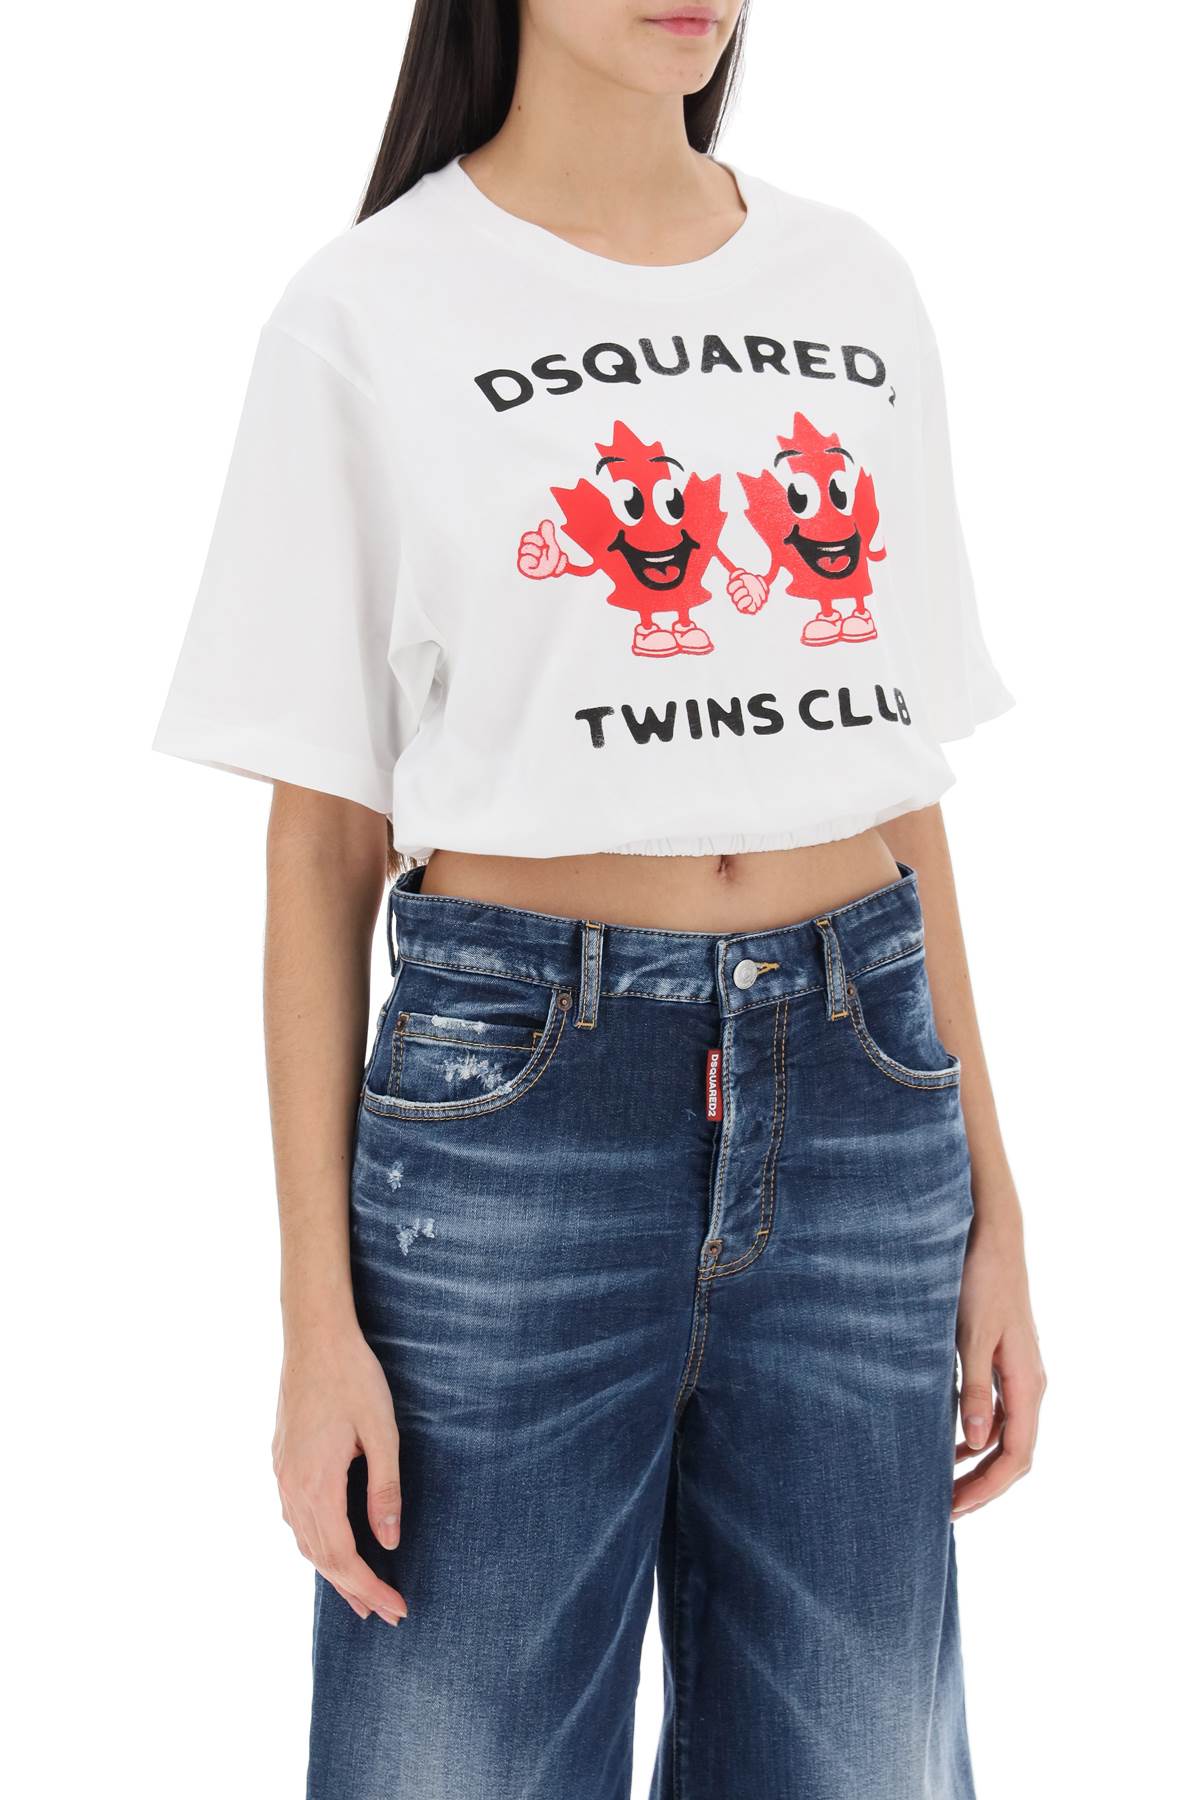 Dsquared2 cropped t-shirt with twins club print-1